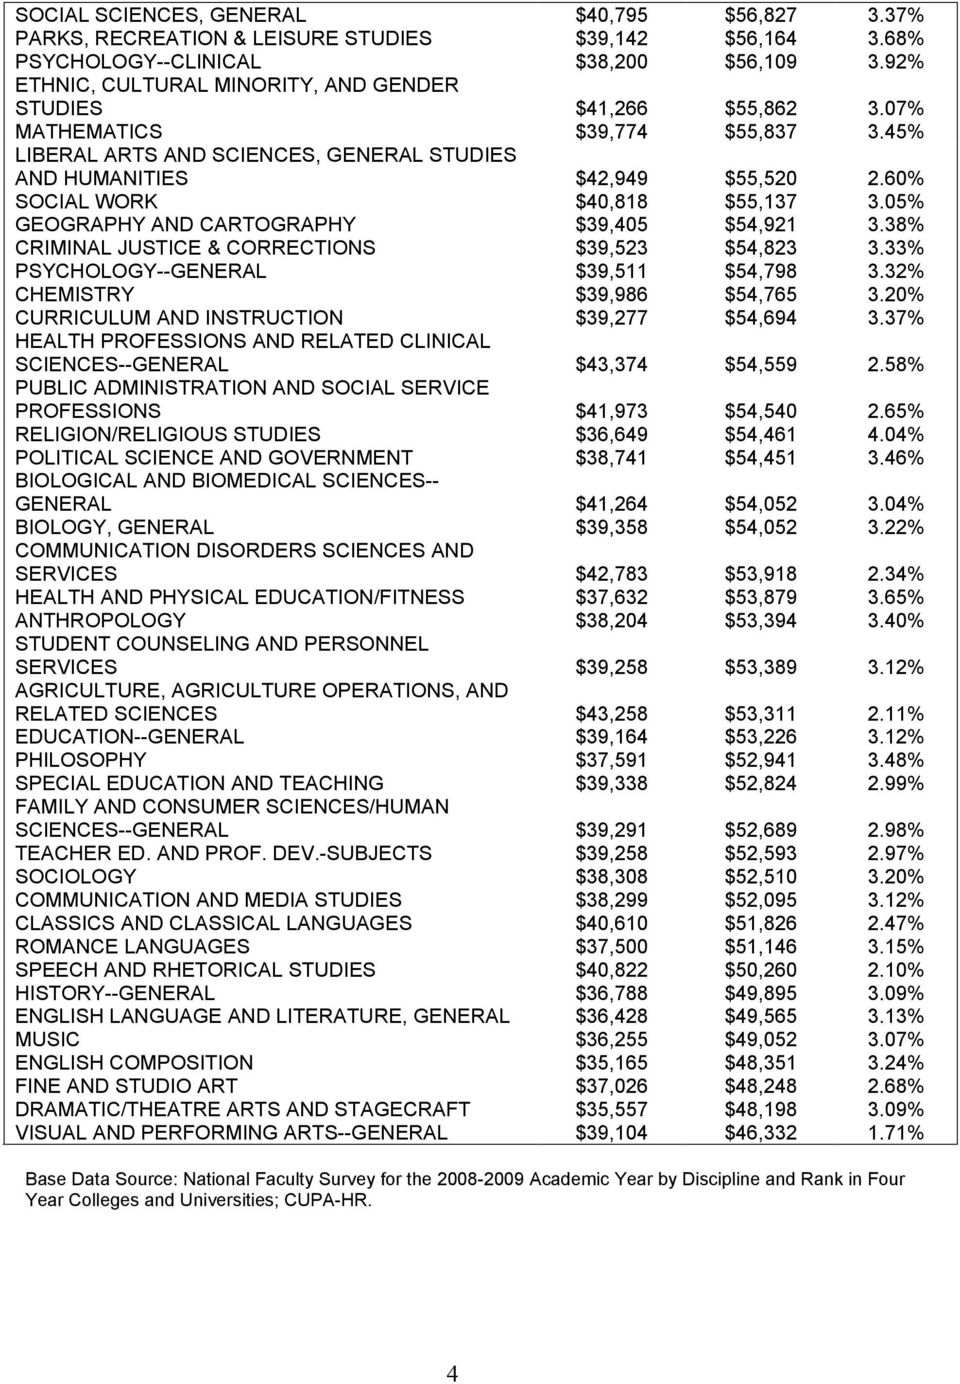 60% SOCIAL WORK $40,818 $55,137 3.05% GEOGRAPHY AND CARTOGRAPHY $39,405 $54,921 3.38% CRIMINAL JUSTICE & CORRECTIONS $39,523 $54,823 3.33% PSYCHOLOGY--GENERAL $39,511 $54,798 3.